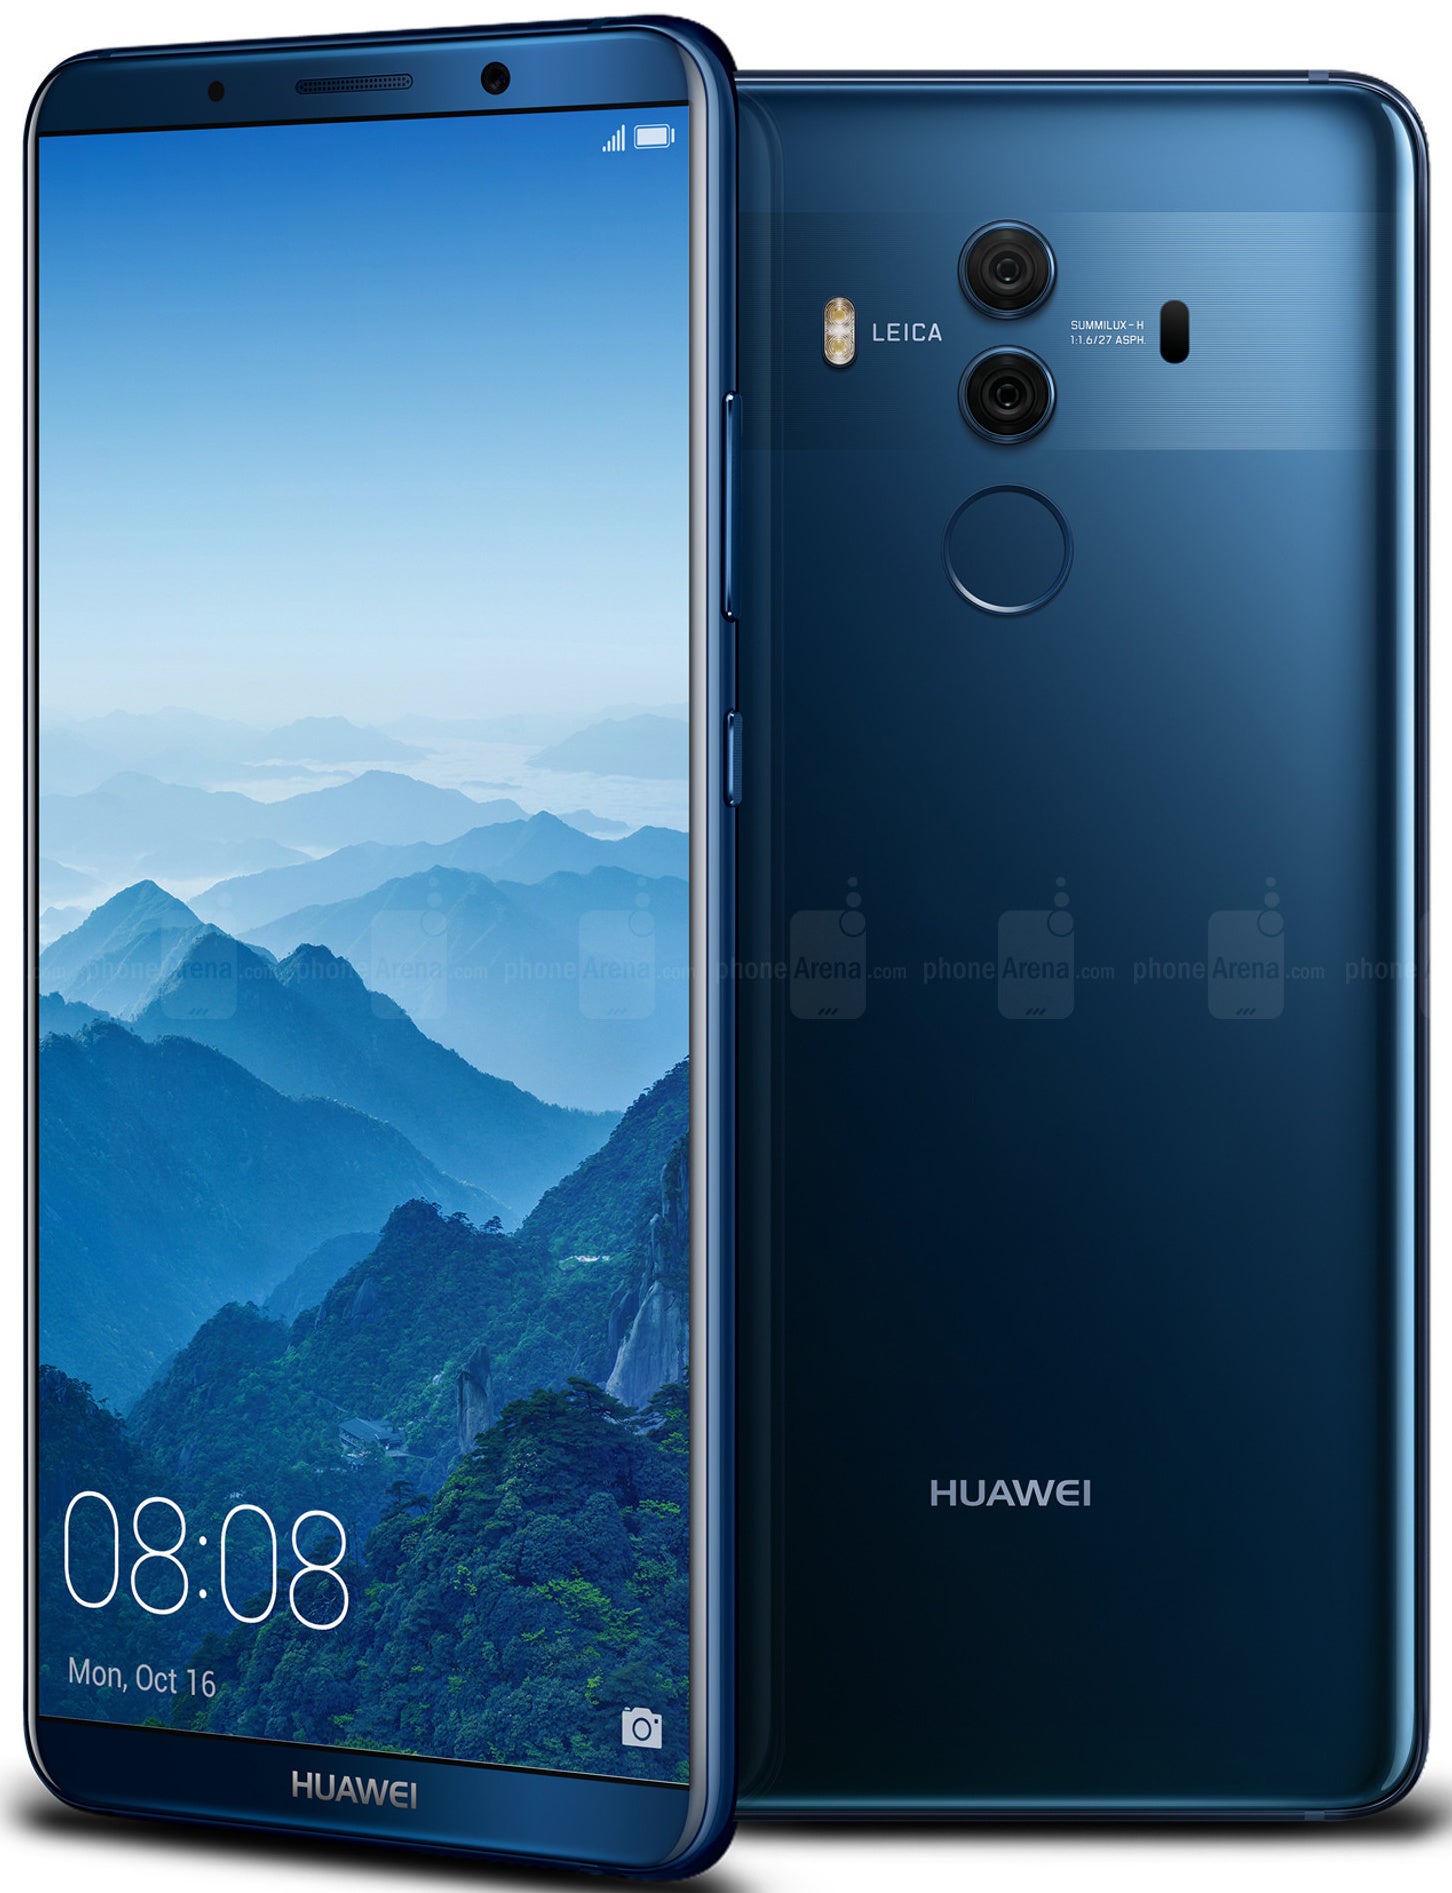 Mate 10 Pro is good, expensive, and Huawei&#039;s profit margin on it is as much as Apple&#039;s - Do you know who else has Apple&#039;s profit margins? Hint: it&#039;s not Samsung